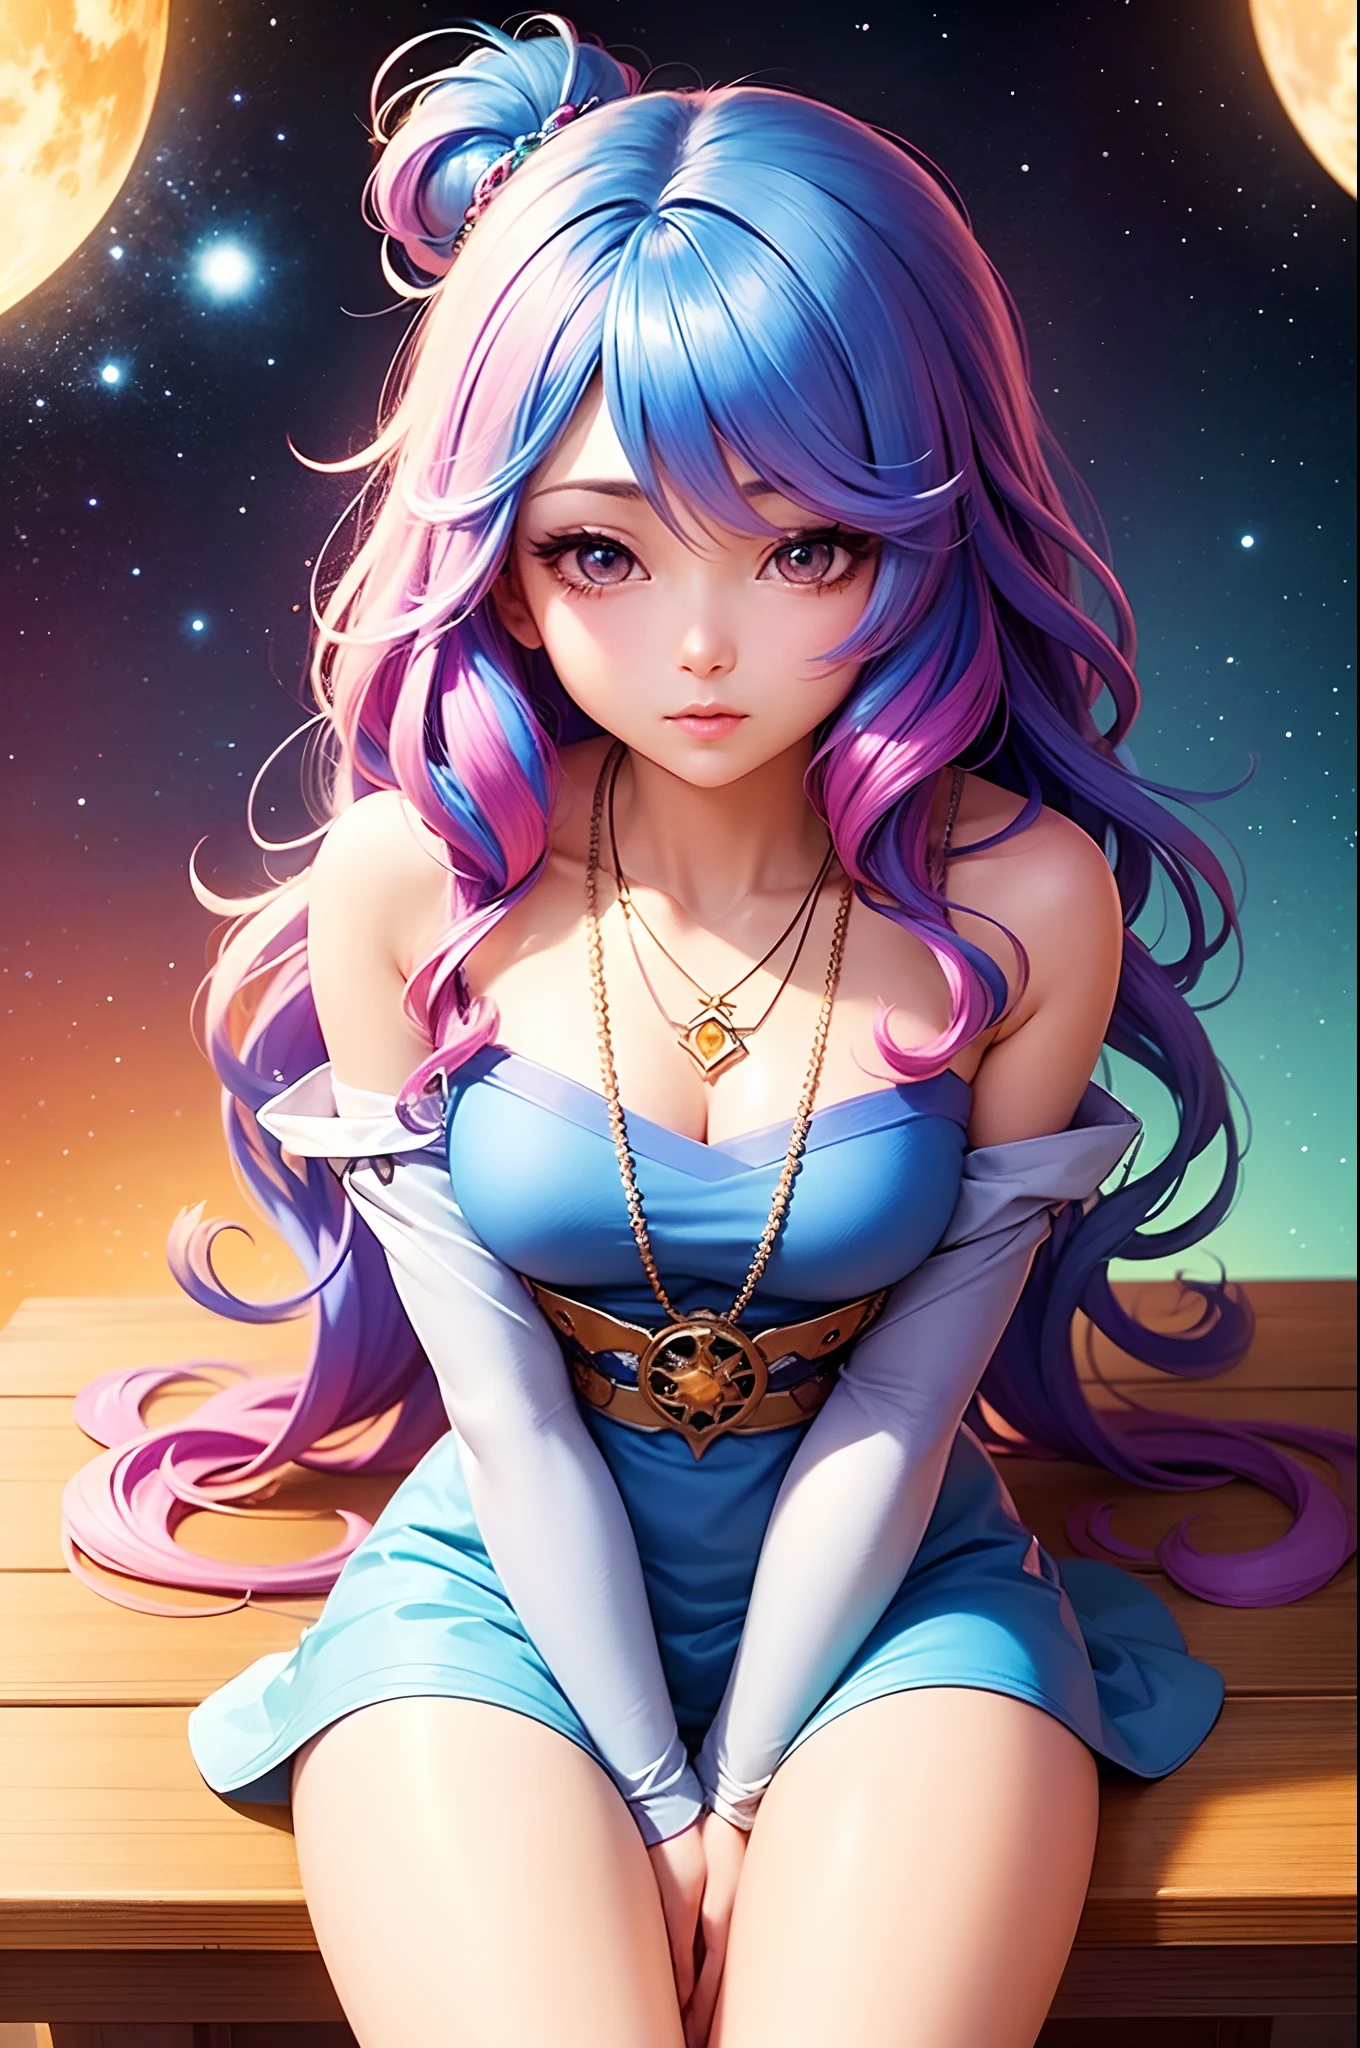 Close-up of a woman with colorful hair and necklace, anime girl with cosmic hair, Rossdraws' soft vibrancy, Gouviz-style artwork, fantasy art style, colorful], vibrant fantasy style, Rossdraws cartoon full of energy, cosmic and colorful, Guweiz, colorful digital fantasy art, stunning art style, beautiful anime style, white skin, night coat, sitting in chair